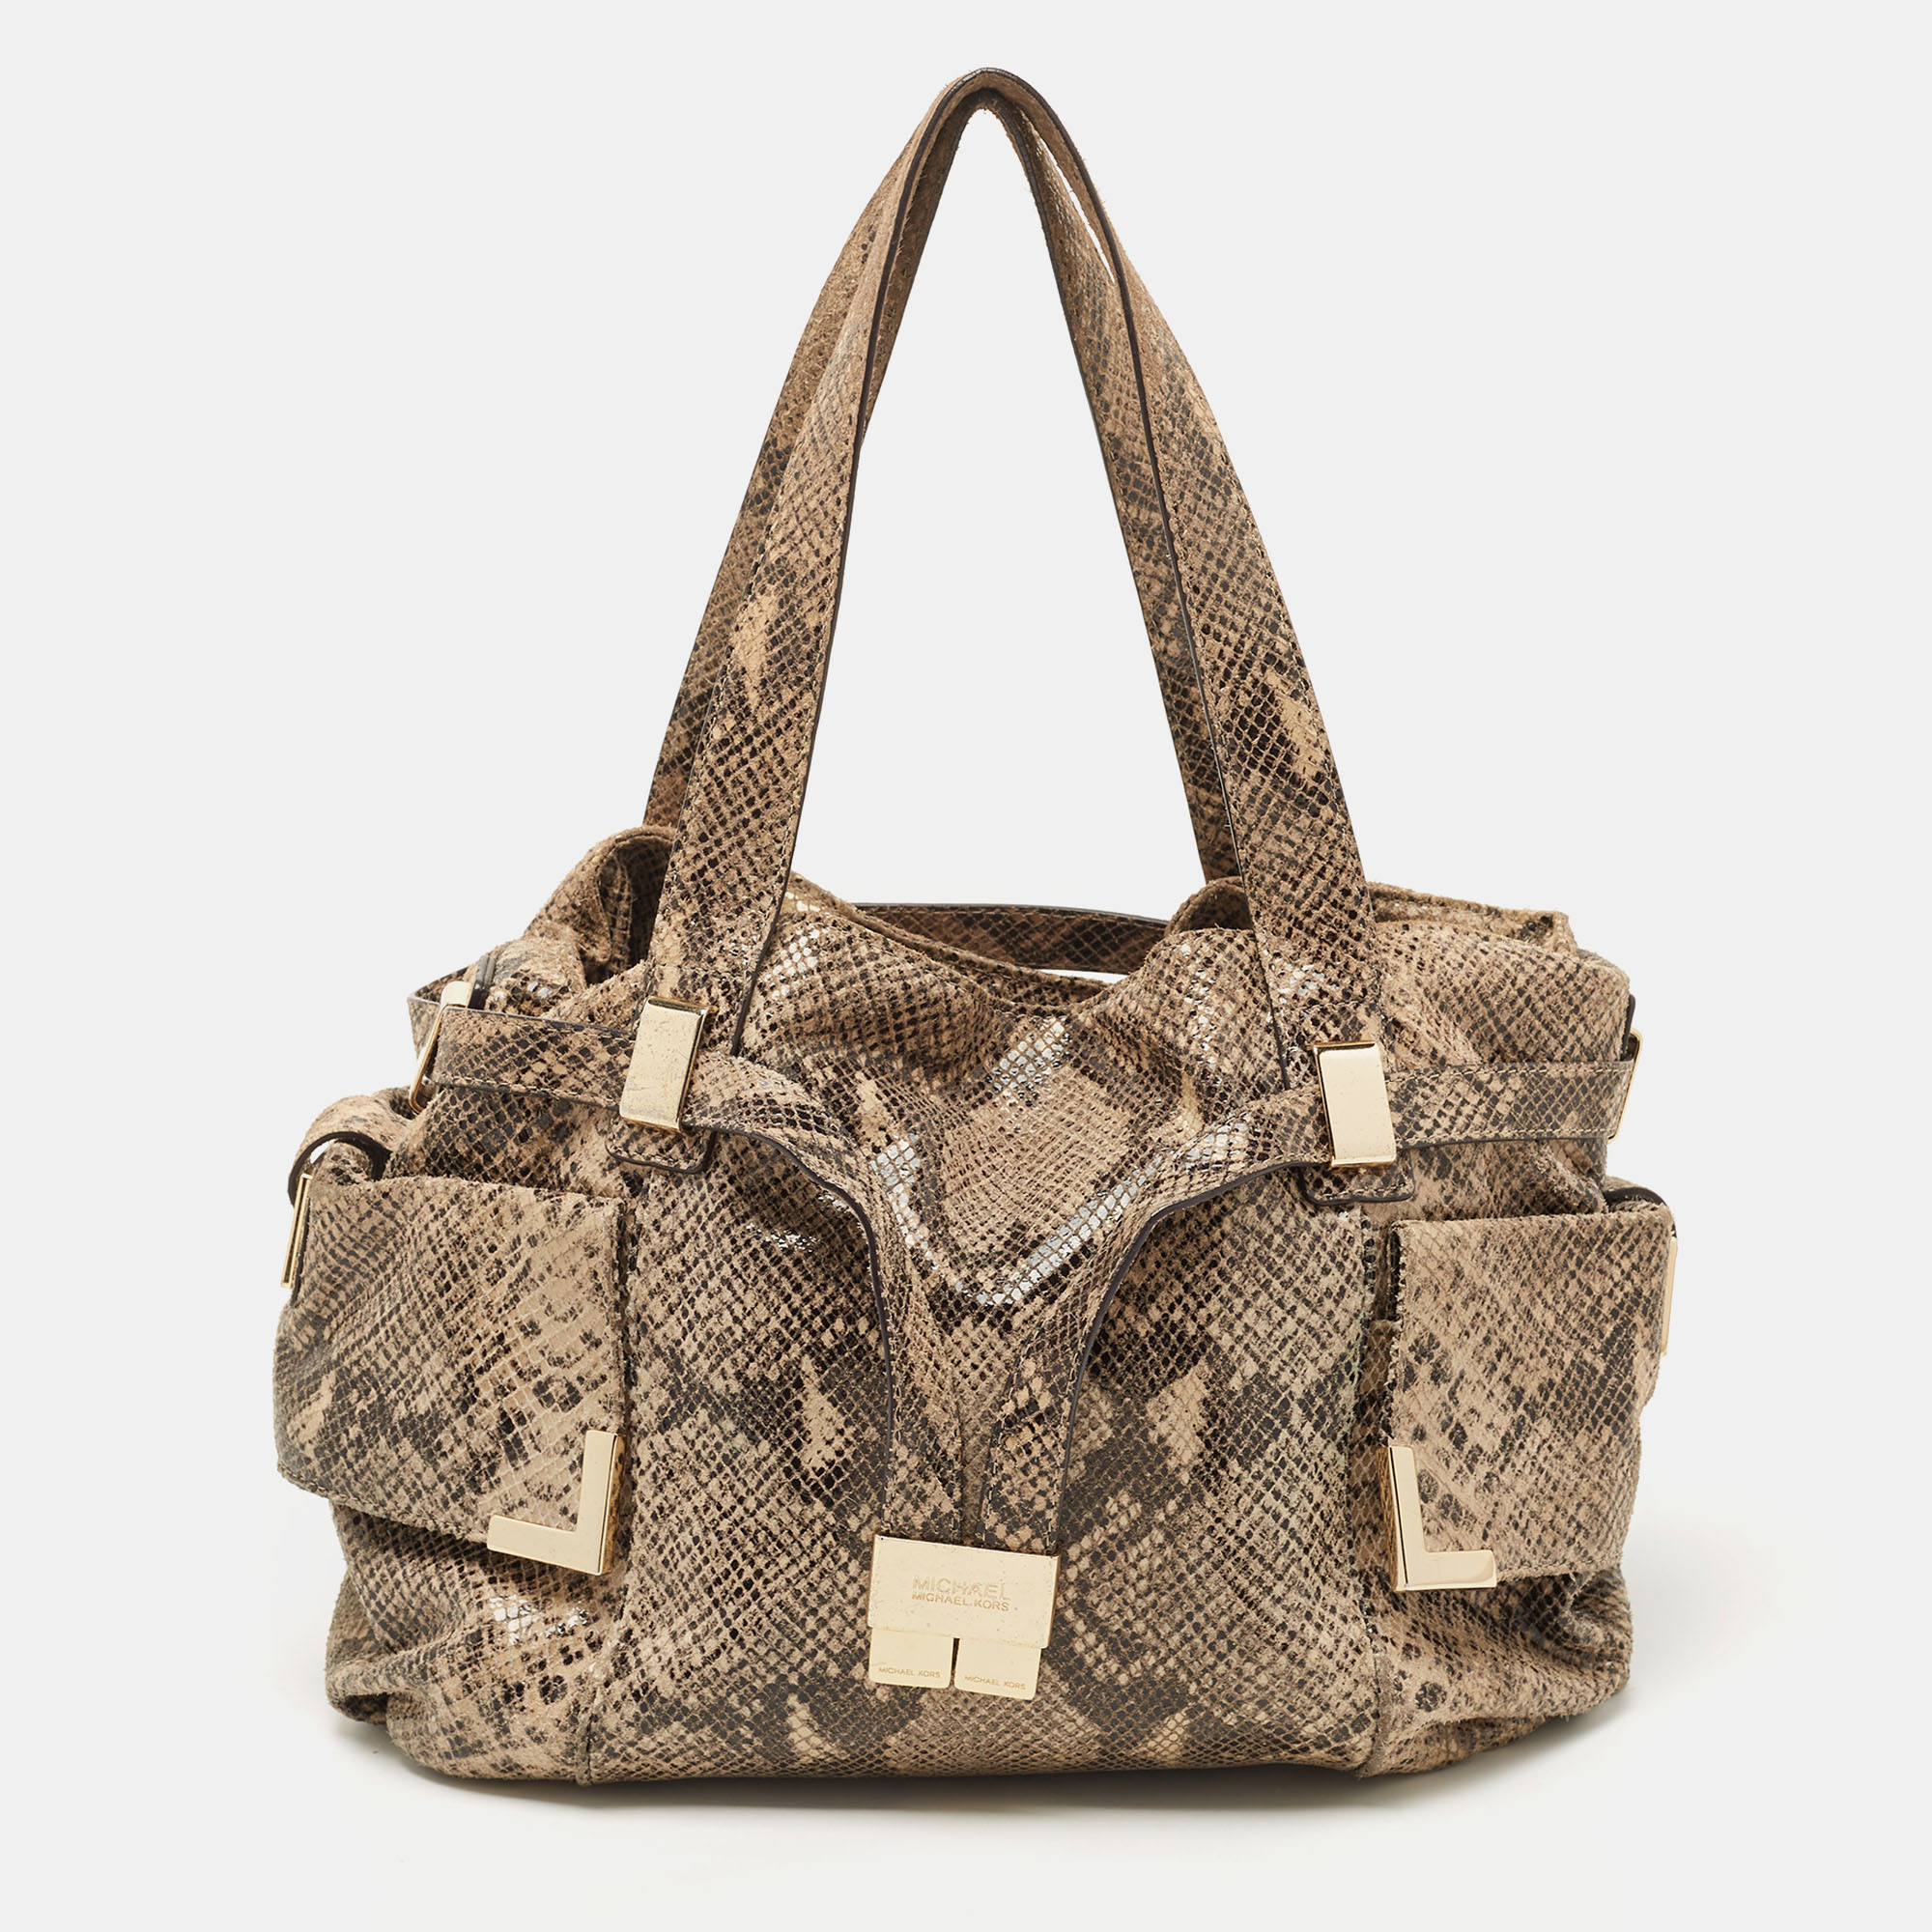 Carefully designed to evoke a rich and elegant feel this leather bag is sure to make a loved buy. This well designed satchel can hold more than just essentials in its nylon lined interior. This Michael Kors satchel has a simple silhouette and a python effect.